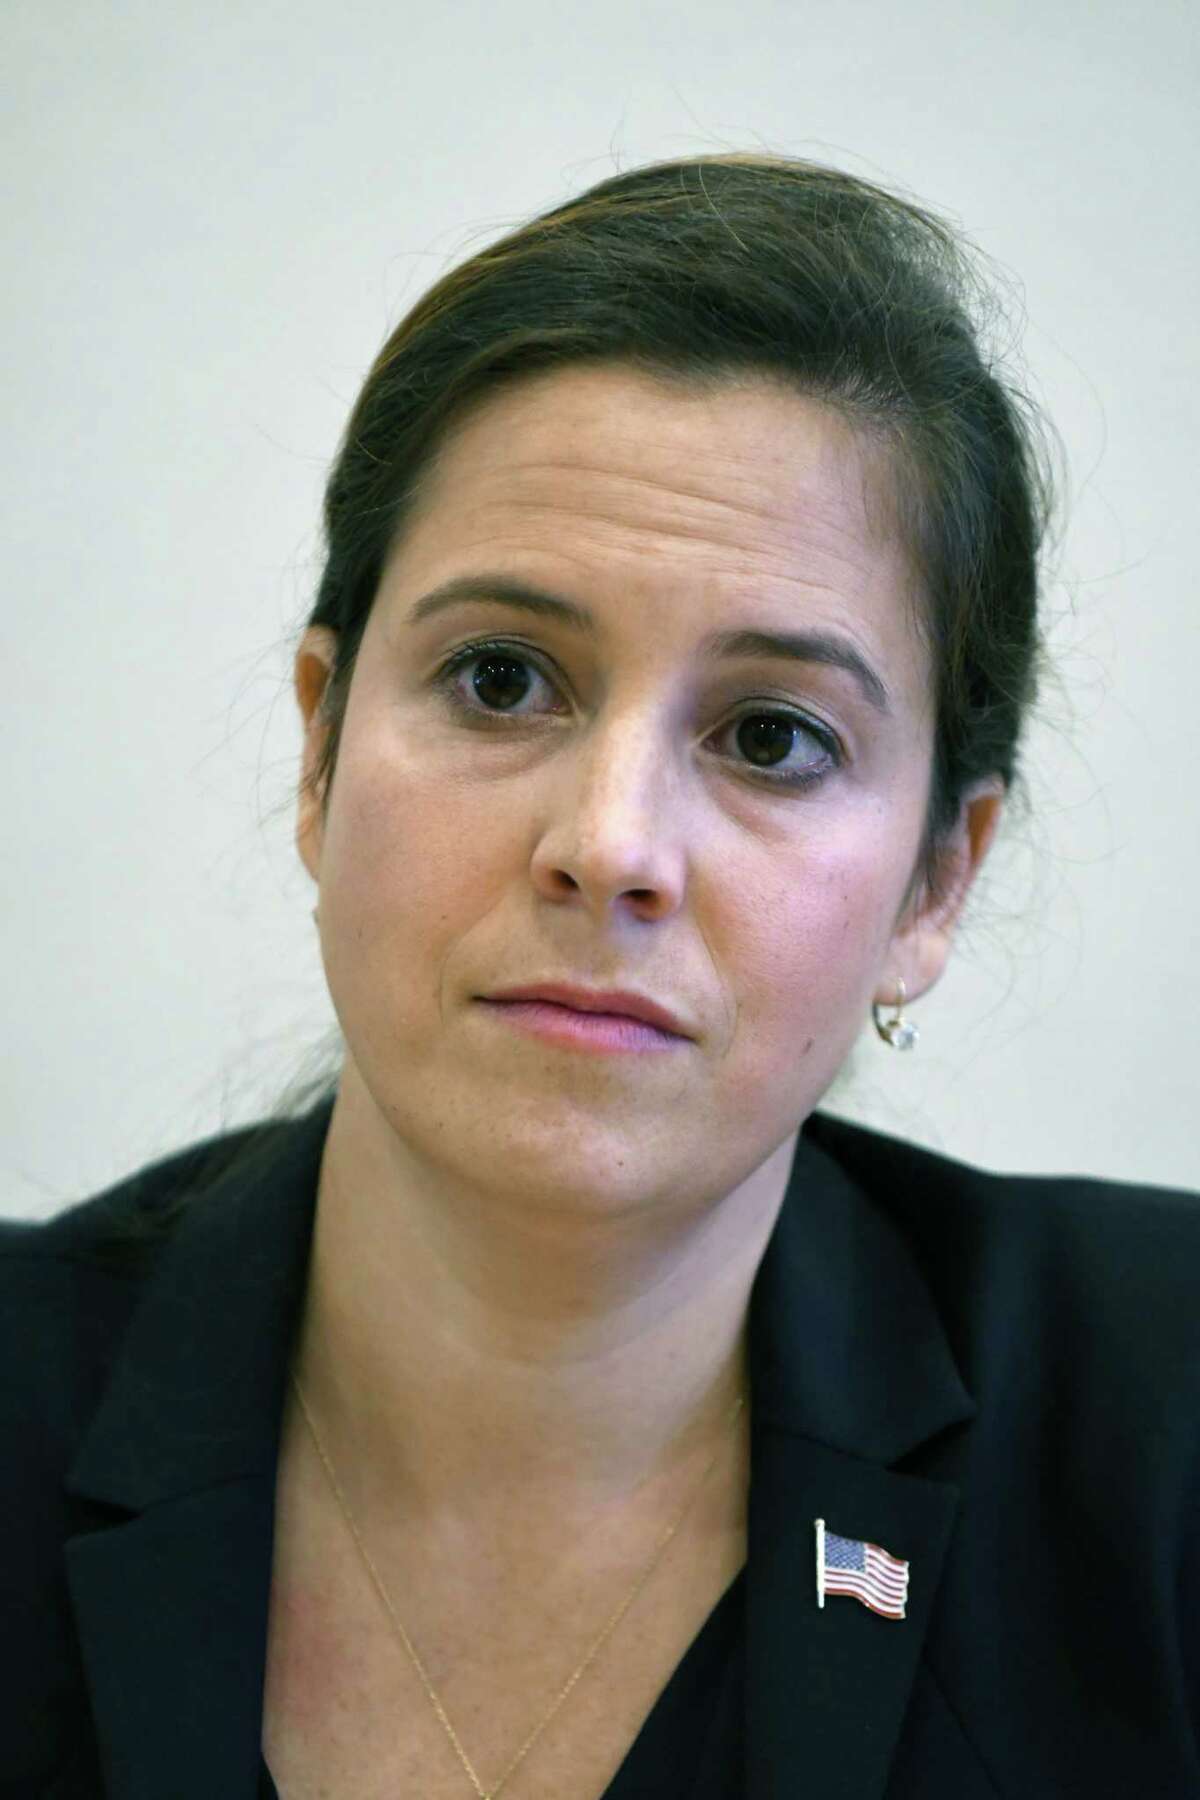 U.S. Rep. Elise Stefanik, 21st CD, speaks to the Times Union editorial board on Tuesday, Oct. 18, 2016, at the Times Union in Colonie, N.Y. (Will Waldron/Times Union)